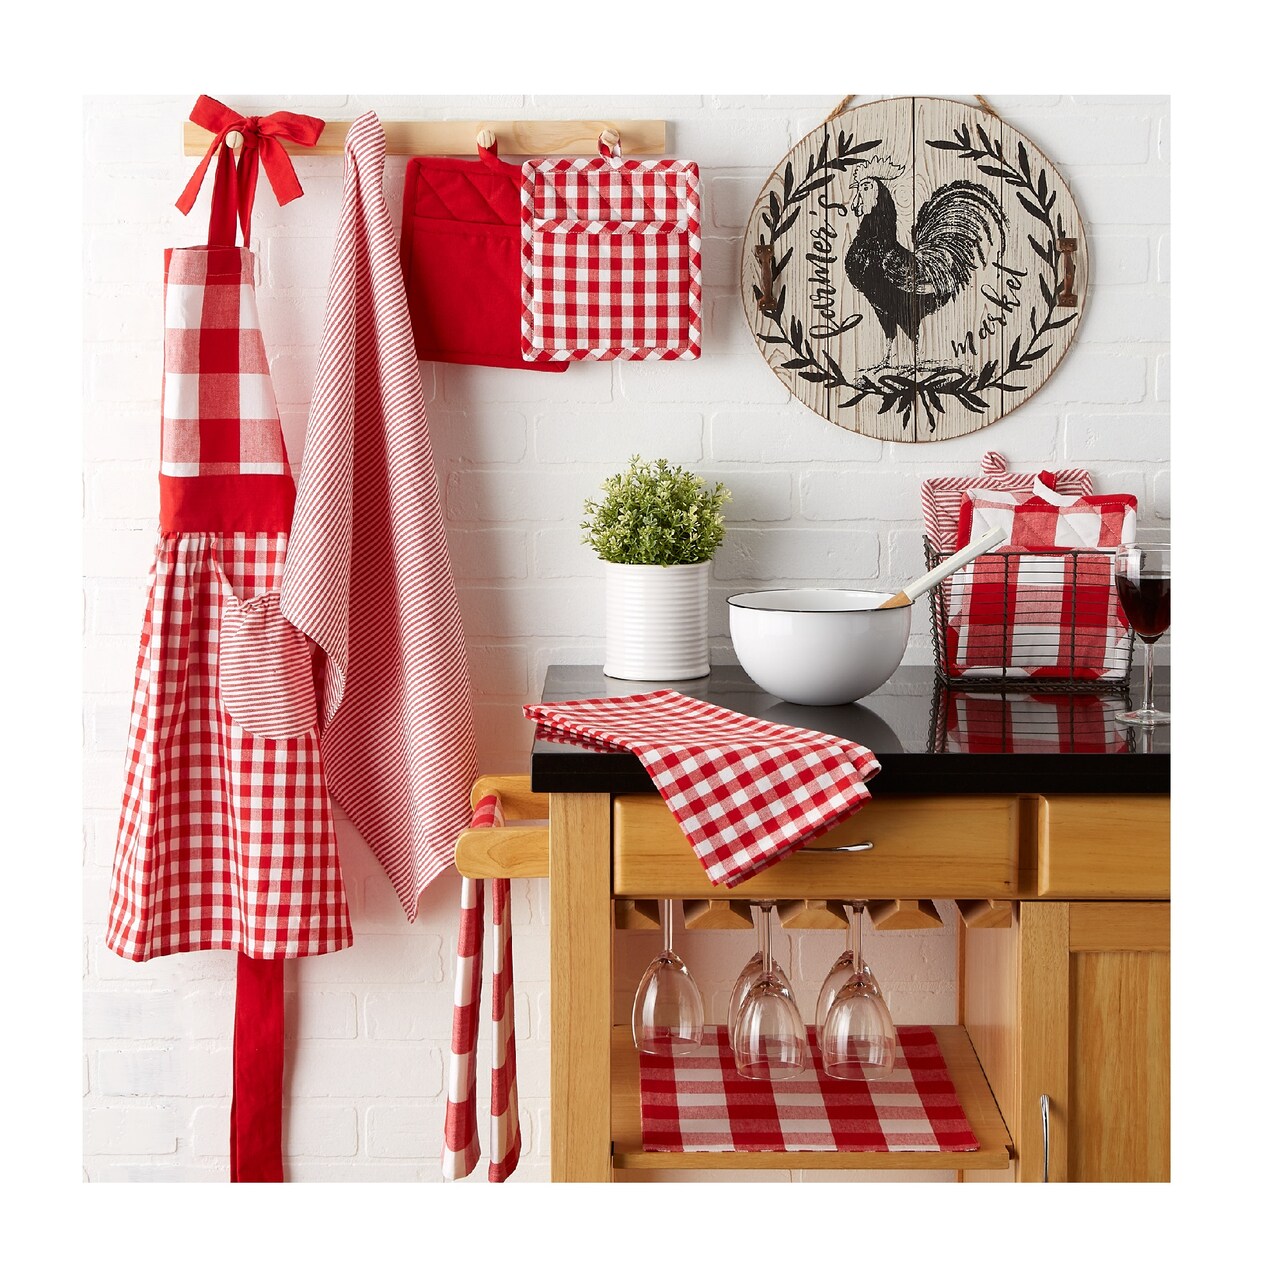 Contemporary Home Living Set of 3 Assorted Red and White Dish Towel, 30